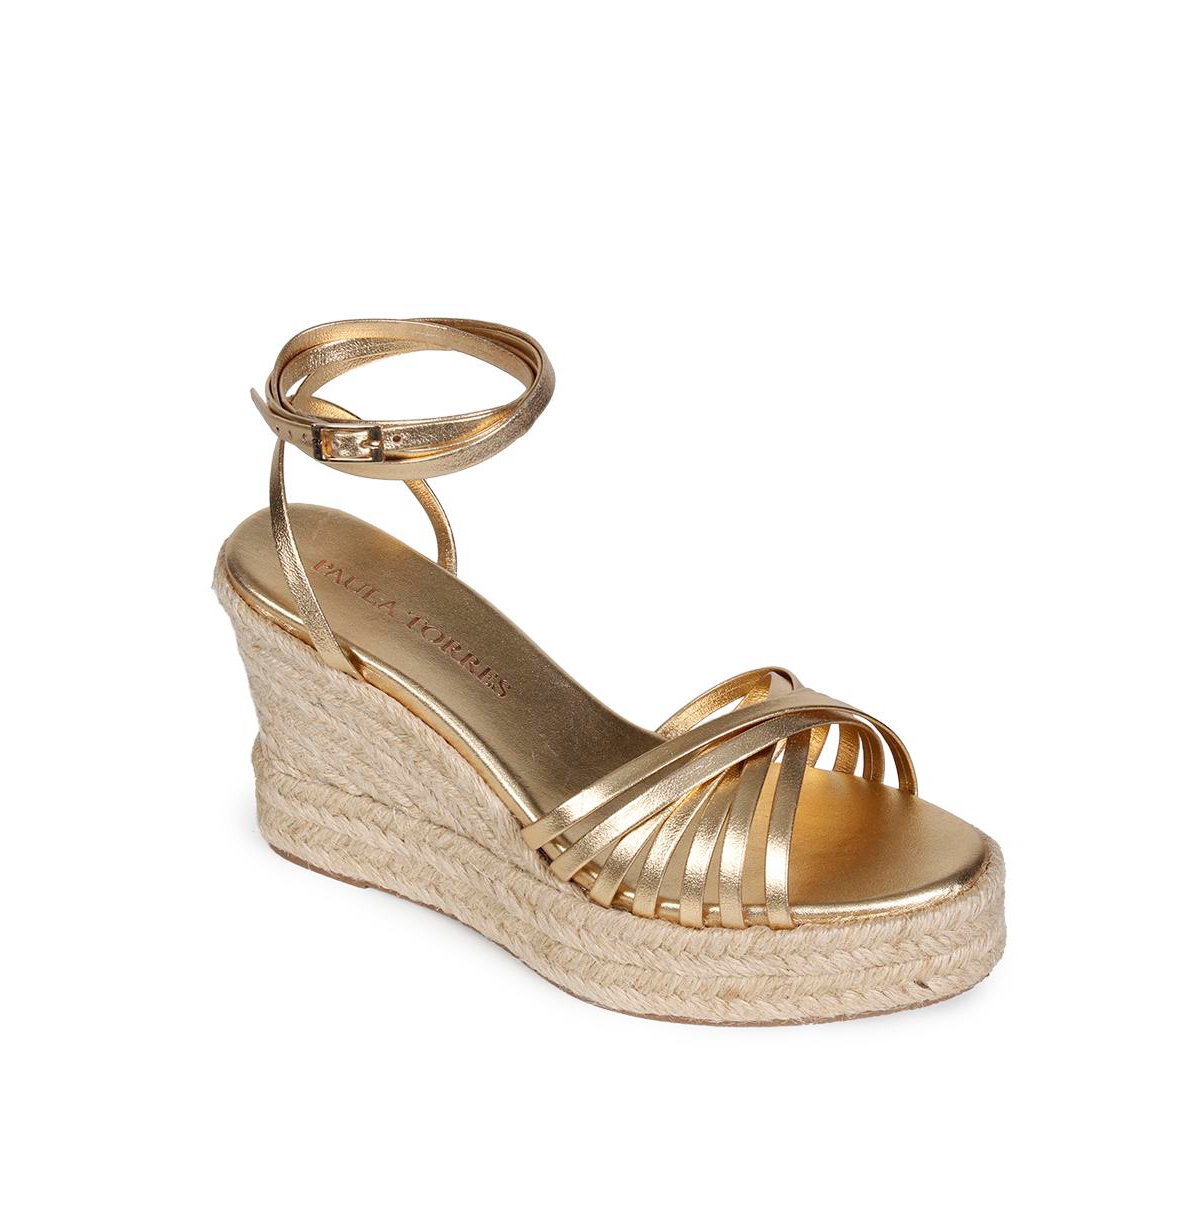 Shoes Women's Alicia Wedge Sandals - Gold